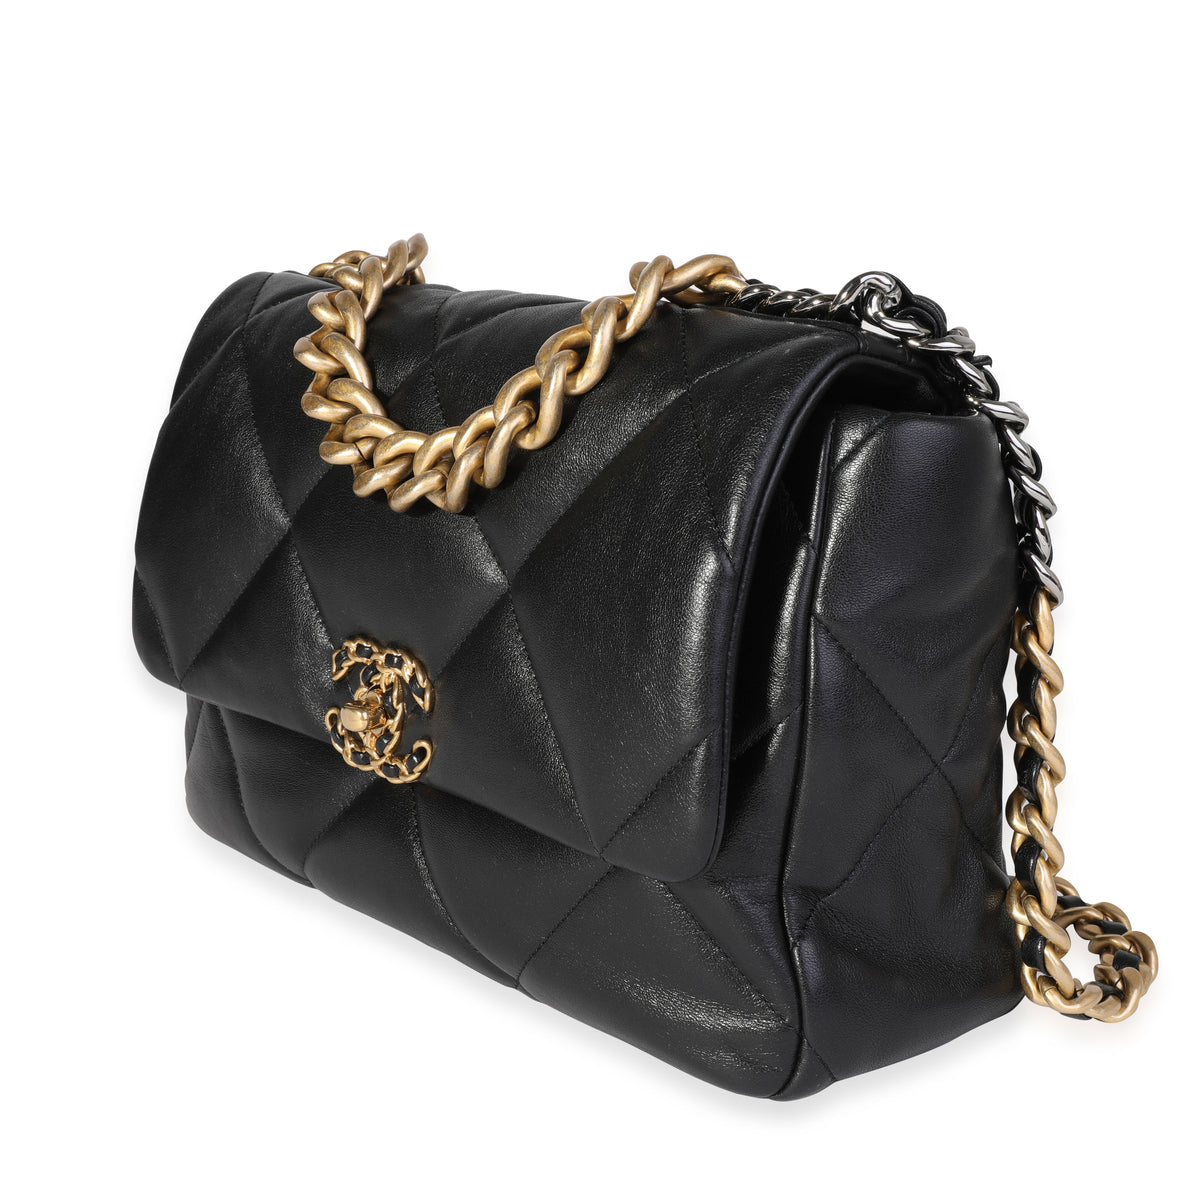 Chanel Black Quilted Lambskin Large Chanel 19 Flap Bag, myGemma, NL